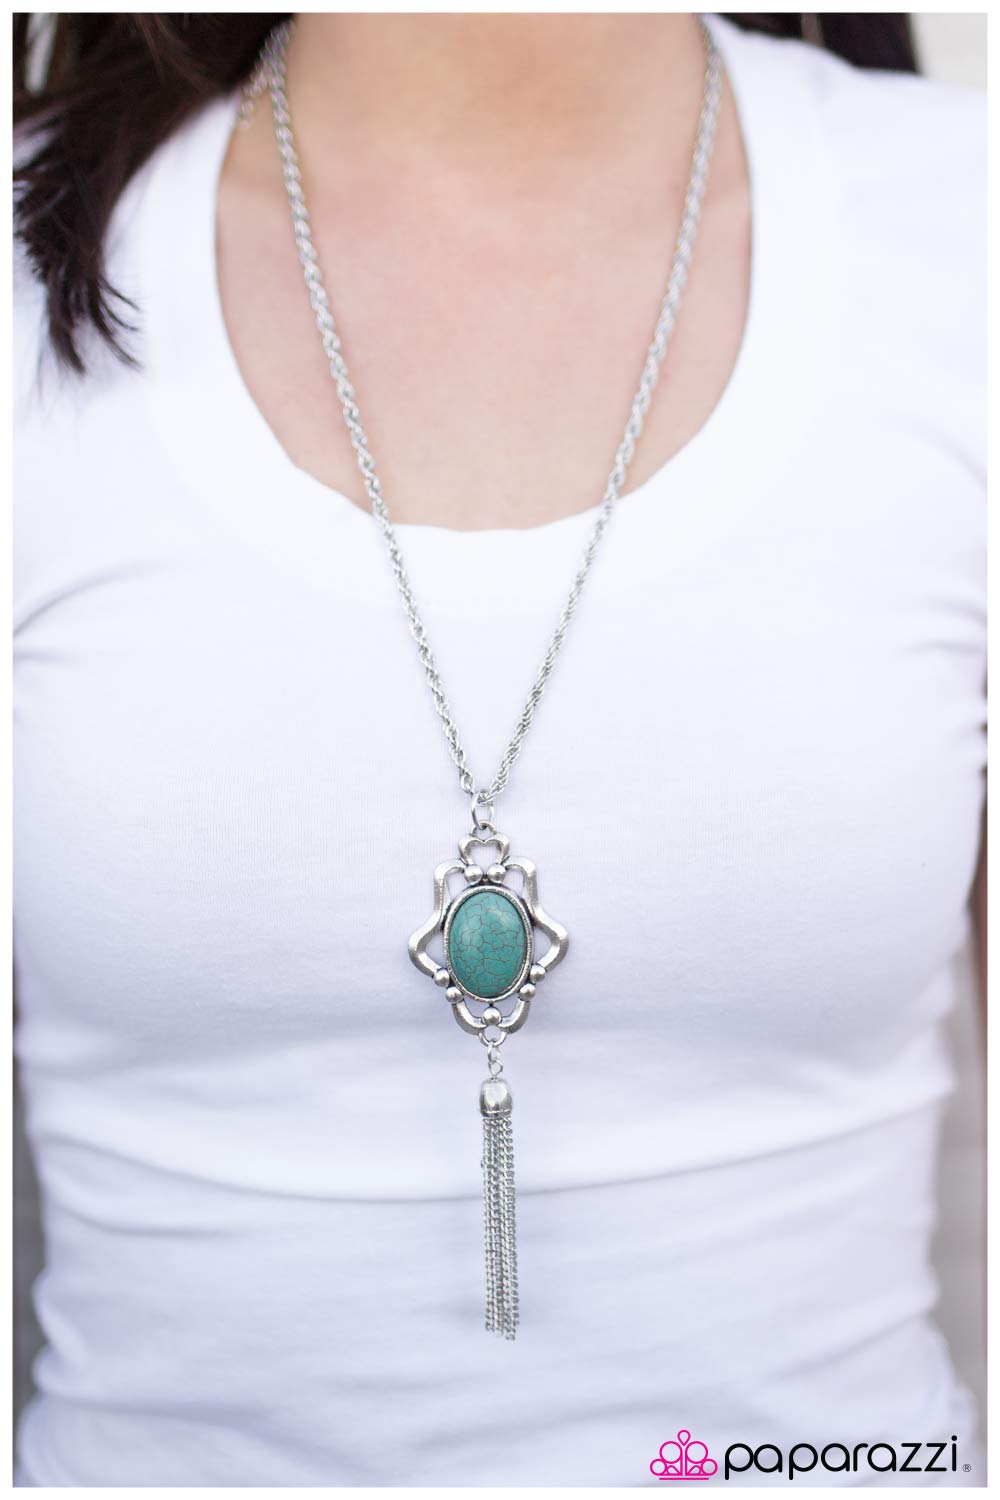 Southern Living - Blue - Paparazzi necklace